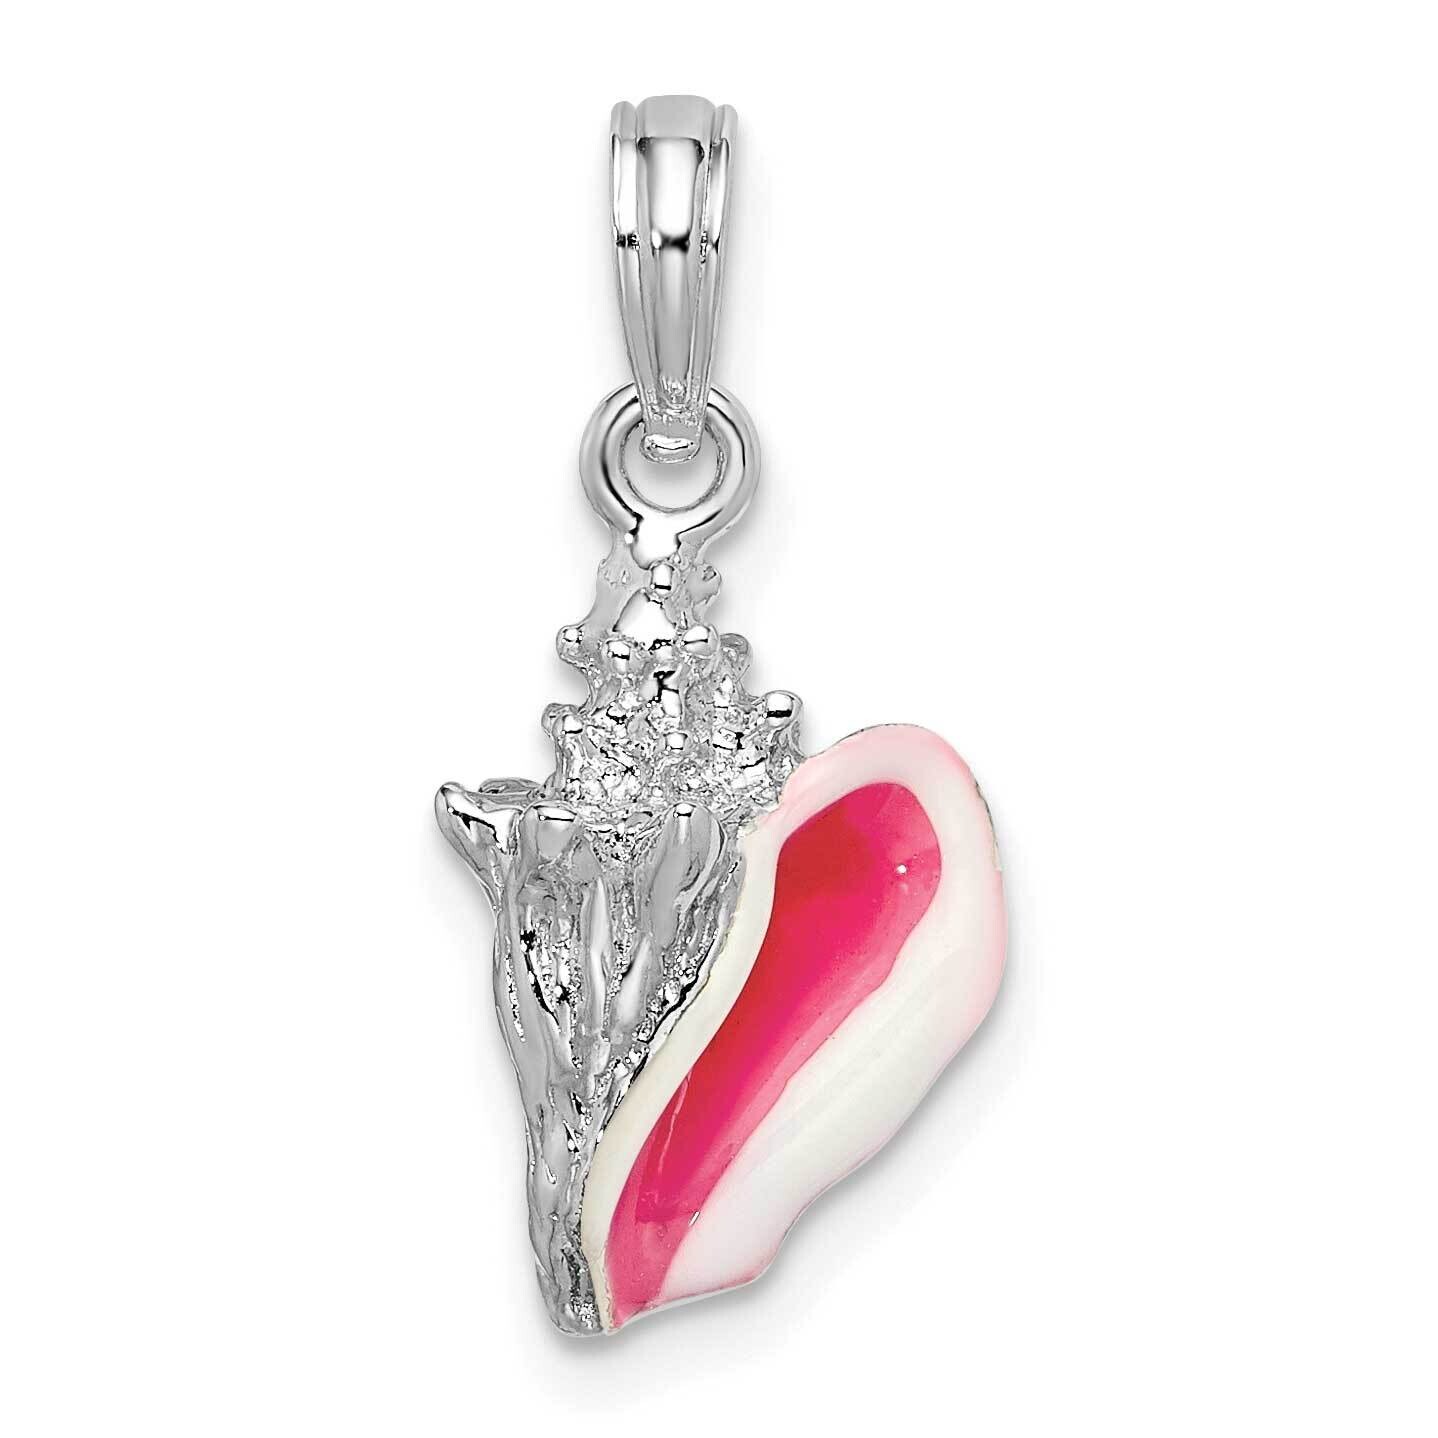 Enameled Small Conch Shell Pendant Sterling Silver Polished QC10696